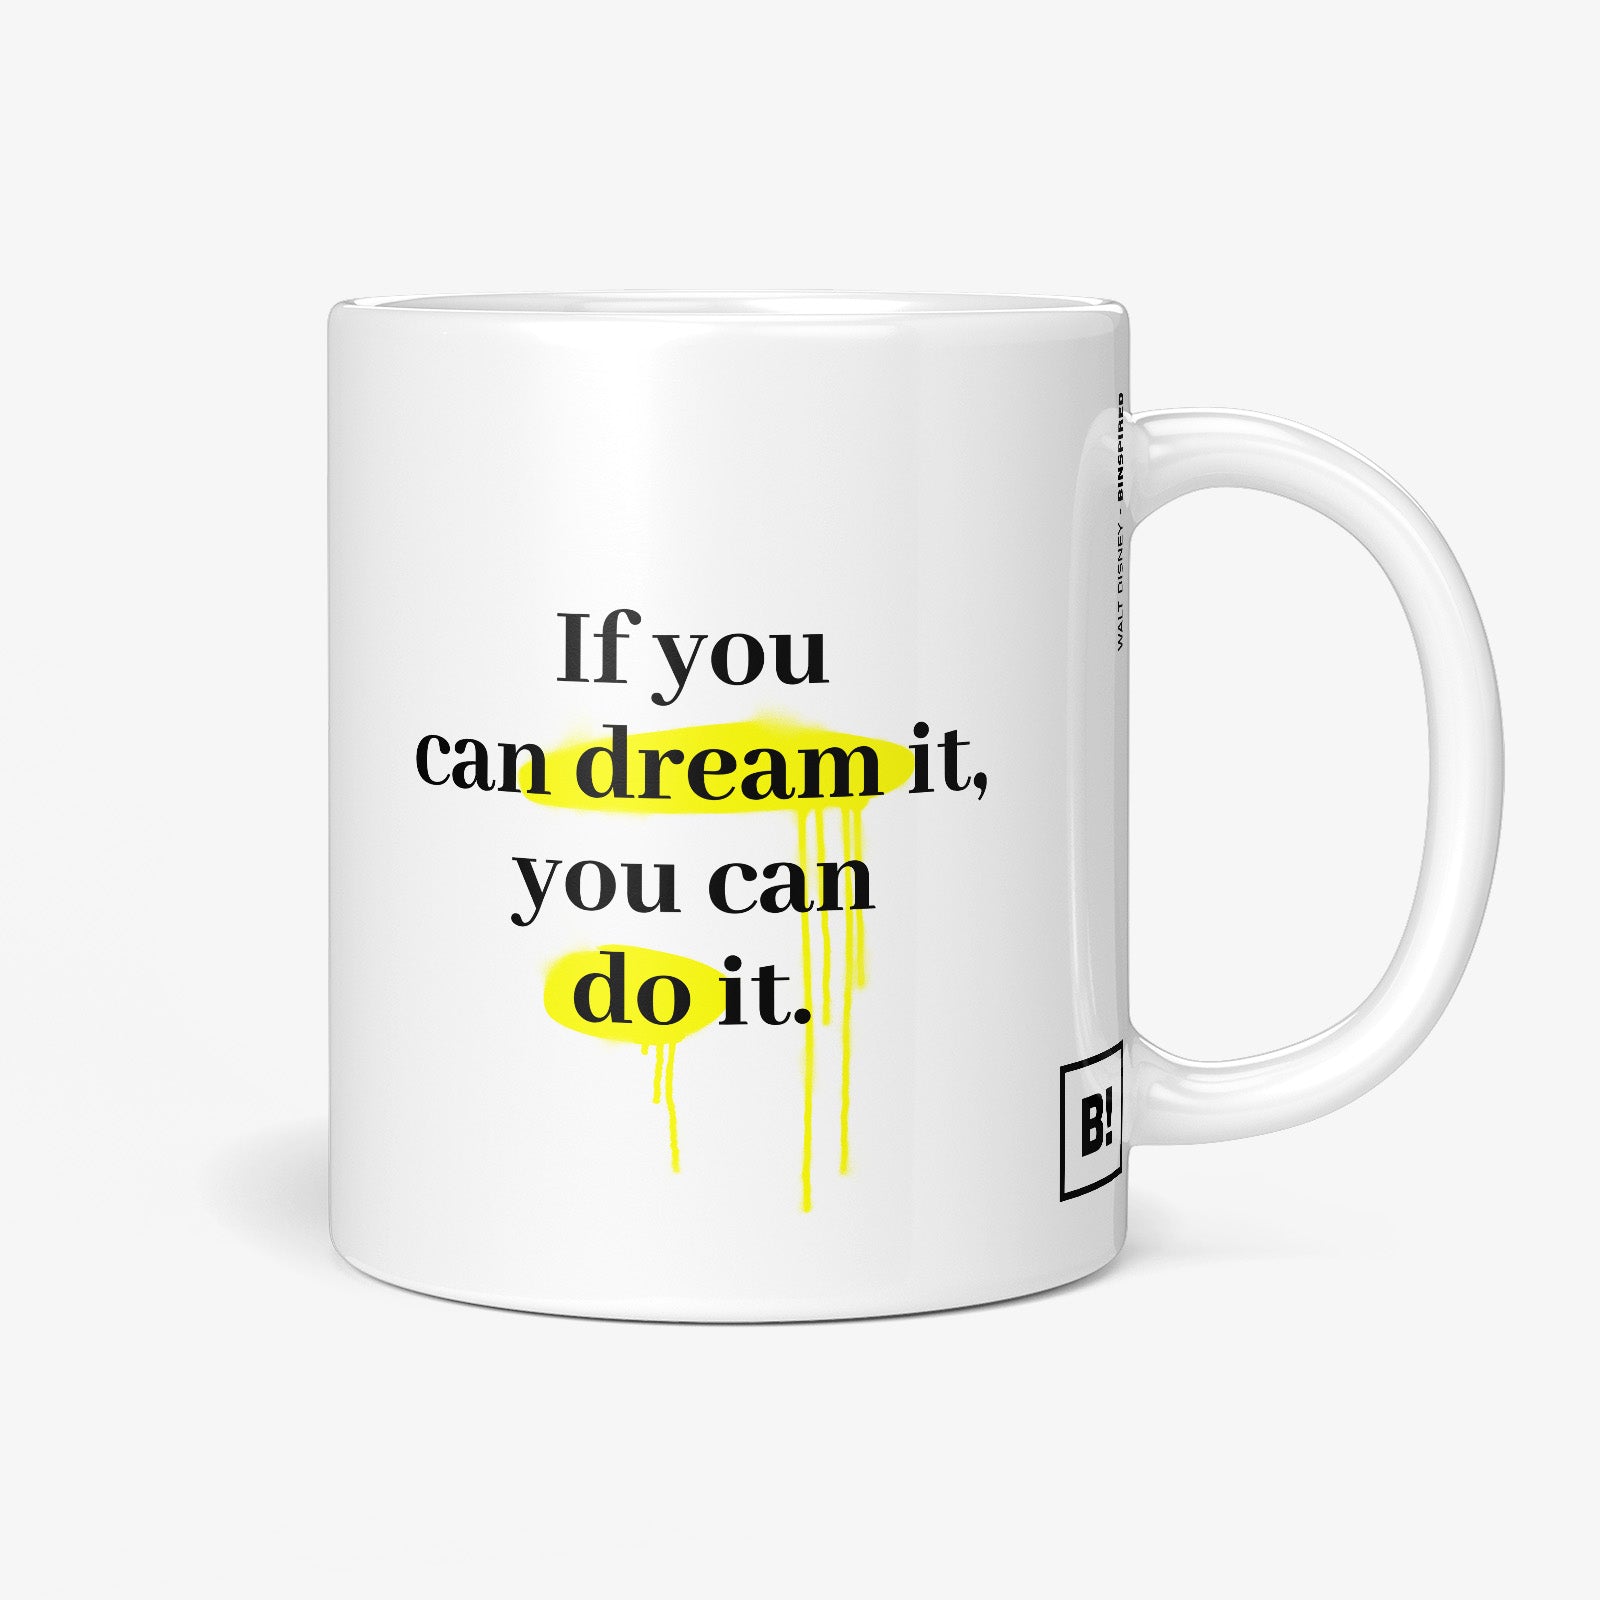 Be inspired by Walt Disney's famous quote, "If you can dream it, you can do it" on this white and glossy 11oz coffee mug with the handle on the right.